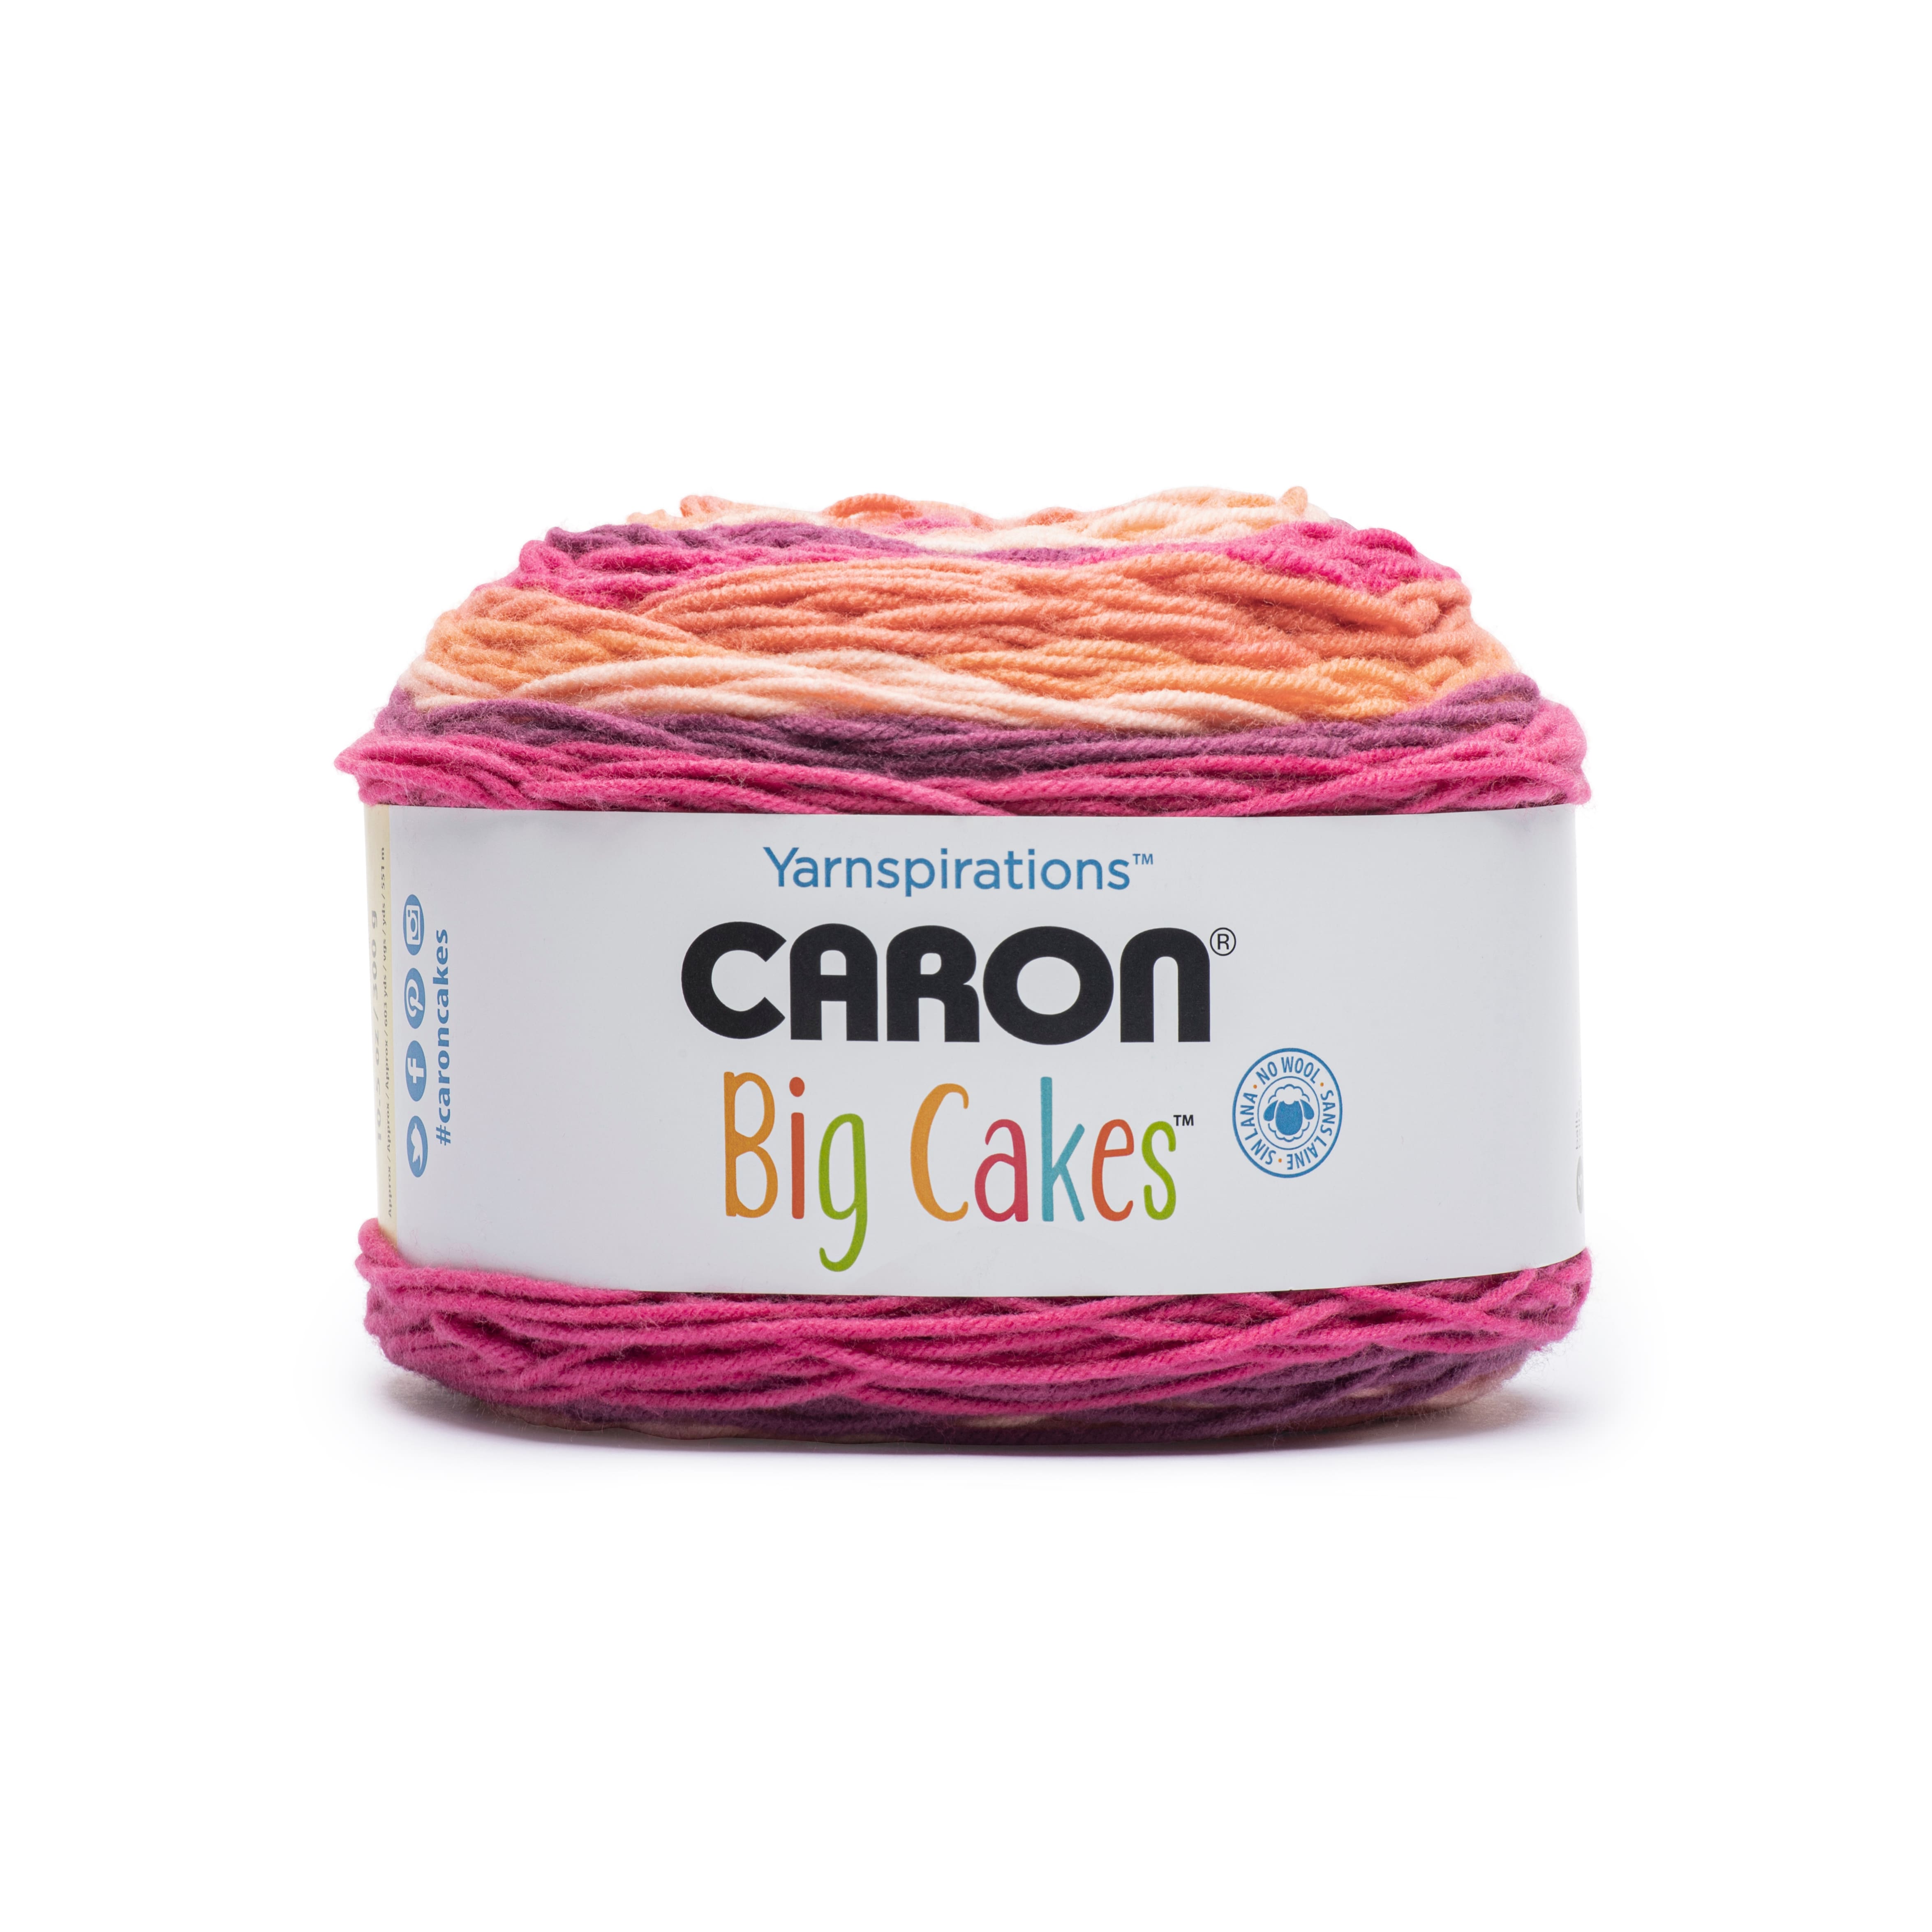 Naztazia - I'm at Michaels looking at all the new Caron Chunky Cakes yarn.  Which one would look good for a new blanket pattern I'm making?